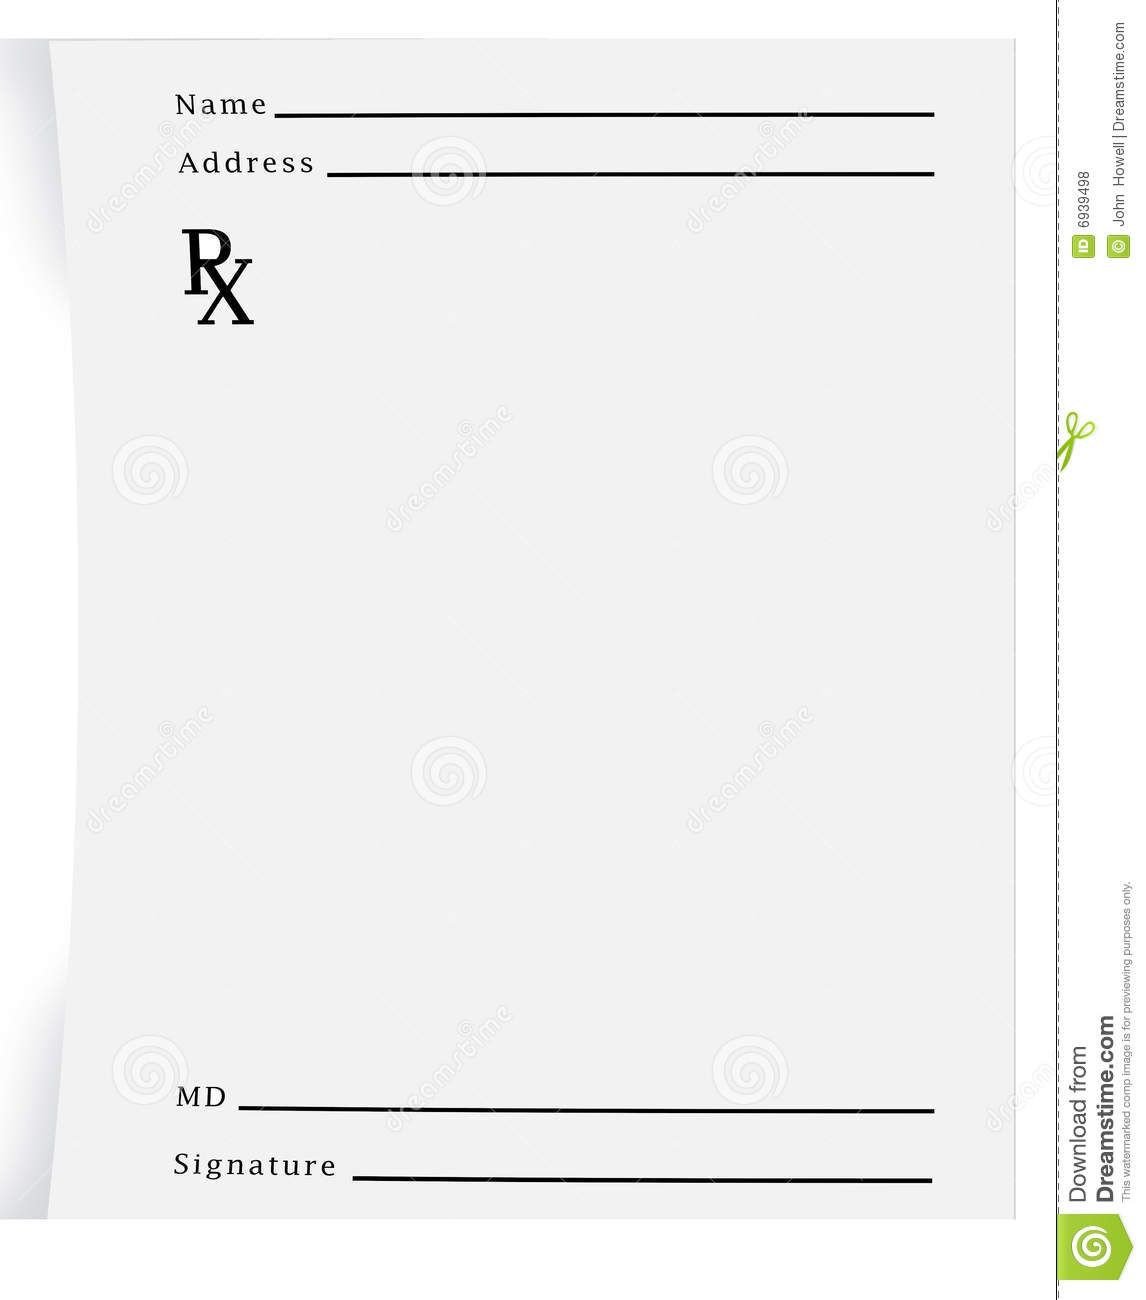 Prescription Pad Blank Download From Over 27 Million